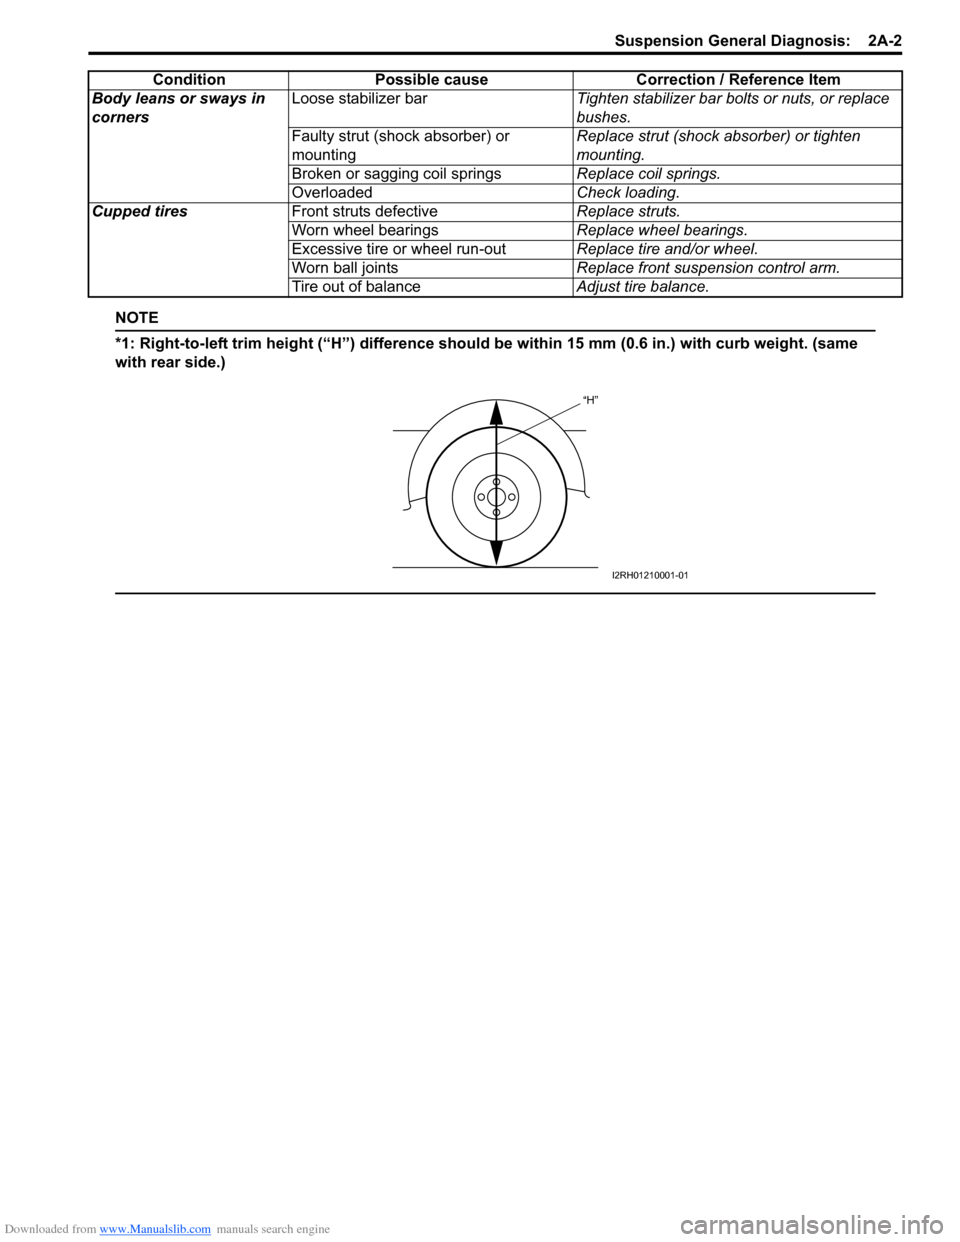 SUZUKI SWIFT 2008 2.G Service Workshop Manual Downloaded from www.Manualslib.com manuals search engine Suspension General Diagnosis:  2A-2
NOTE
*1: Right-to-left trim height (“H”) difference should be within 15 mm (0.6 in.) with curb weight. 